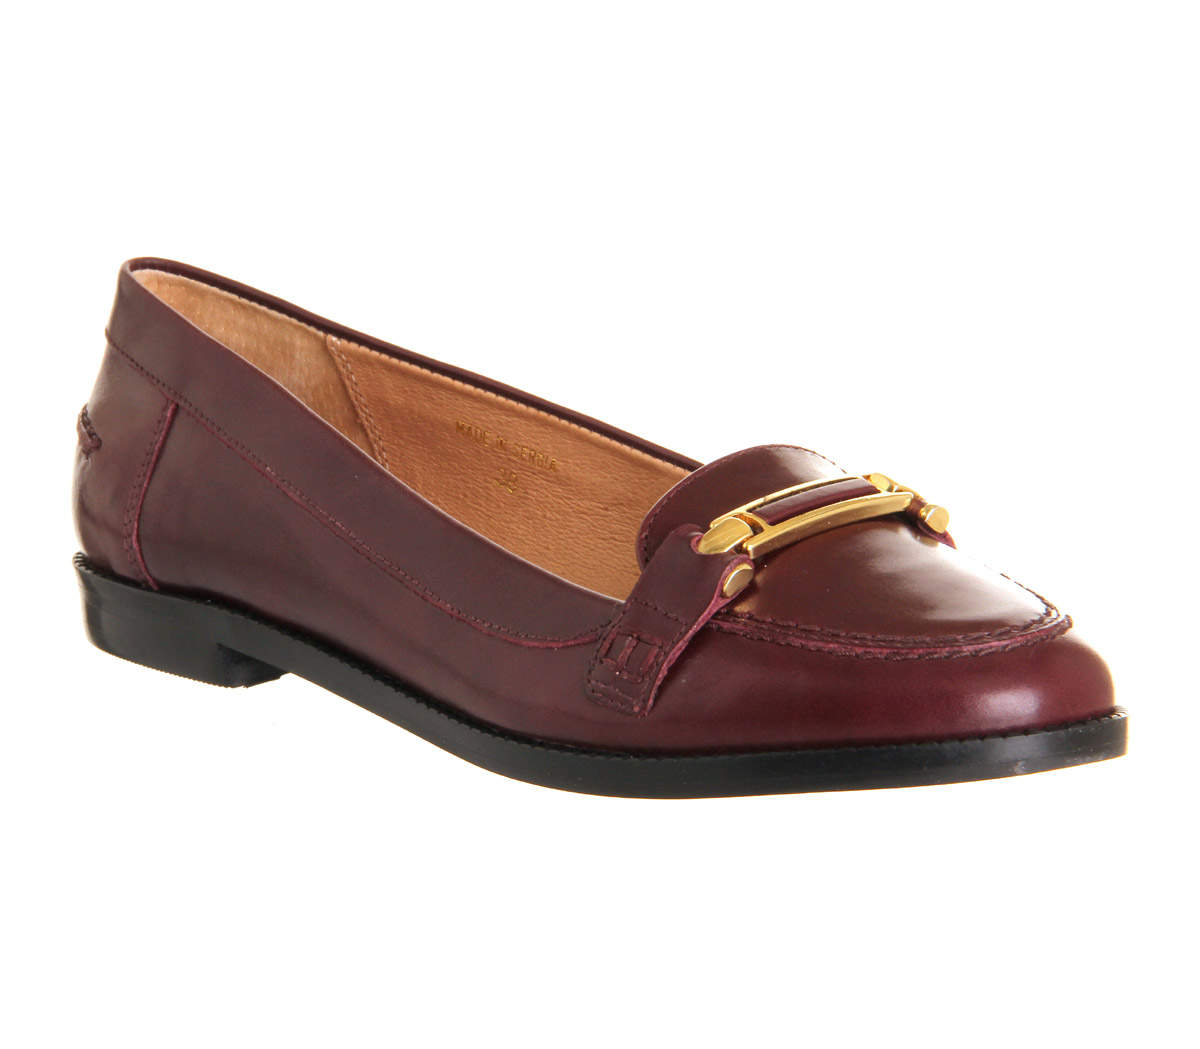 OFFICEVictoria loafersBurgundy Leather